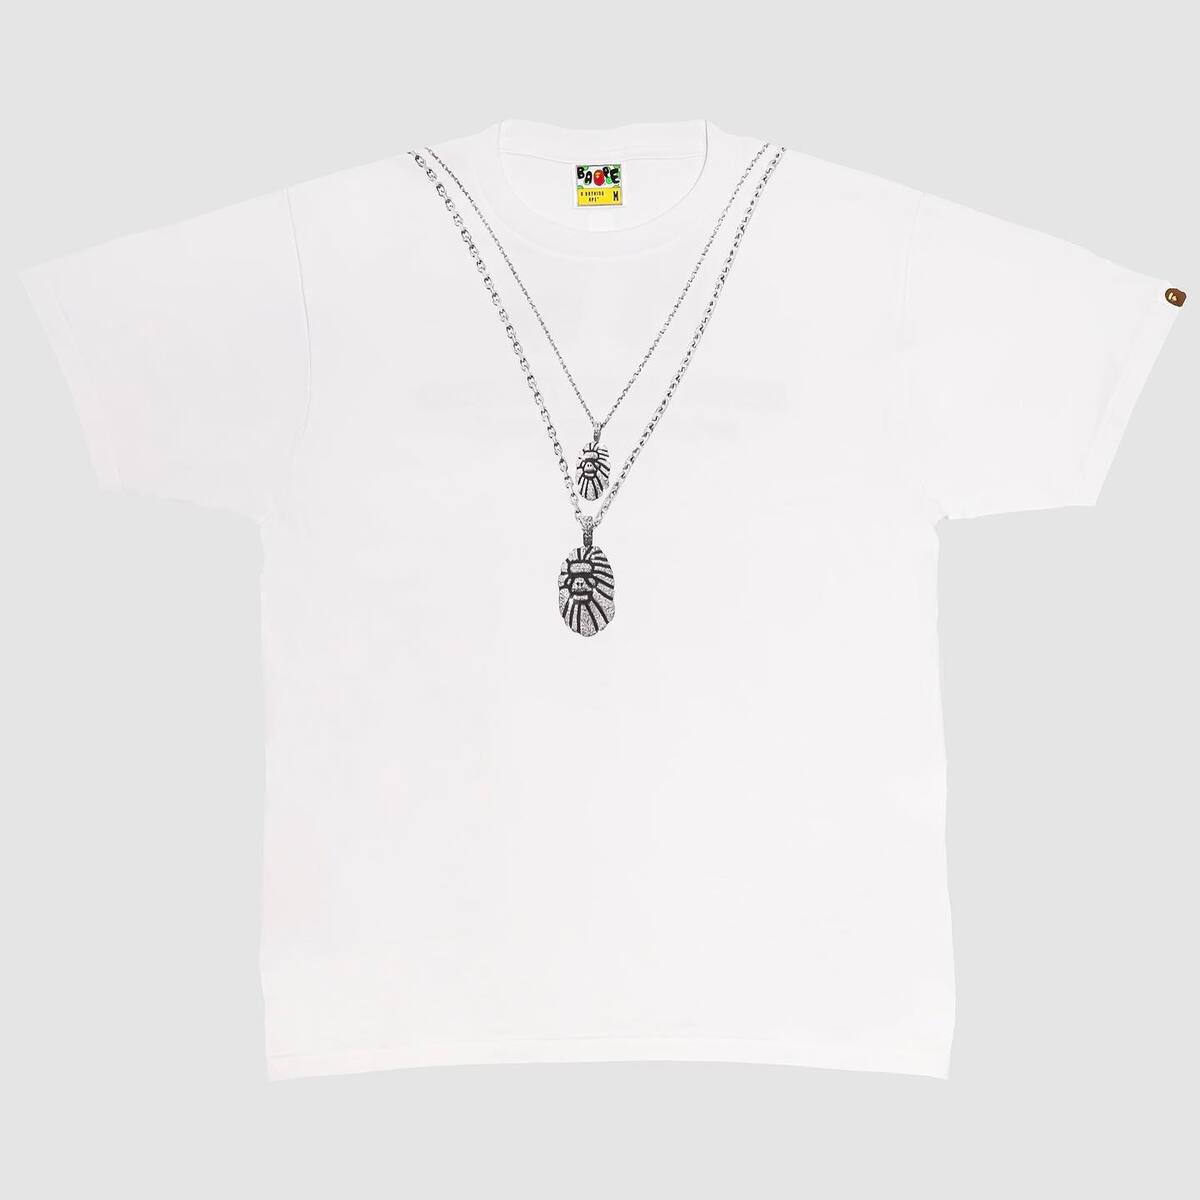 A BATHING APE & Ben Baller Reveal Jewellery Collection – PAUSE Online